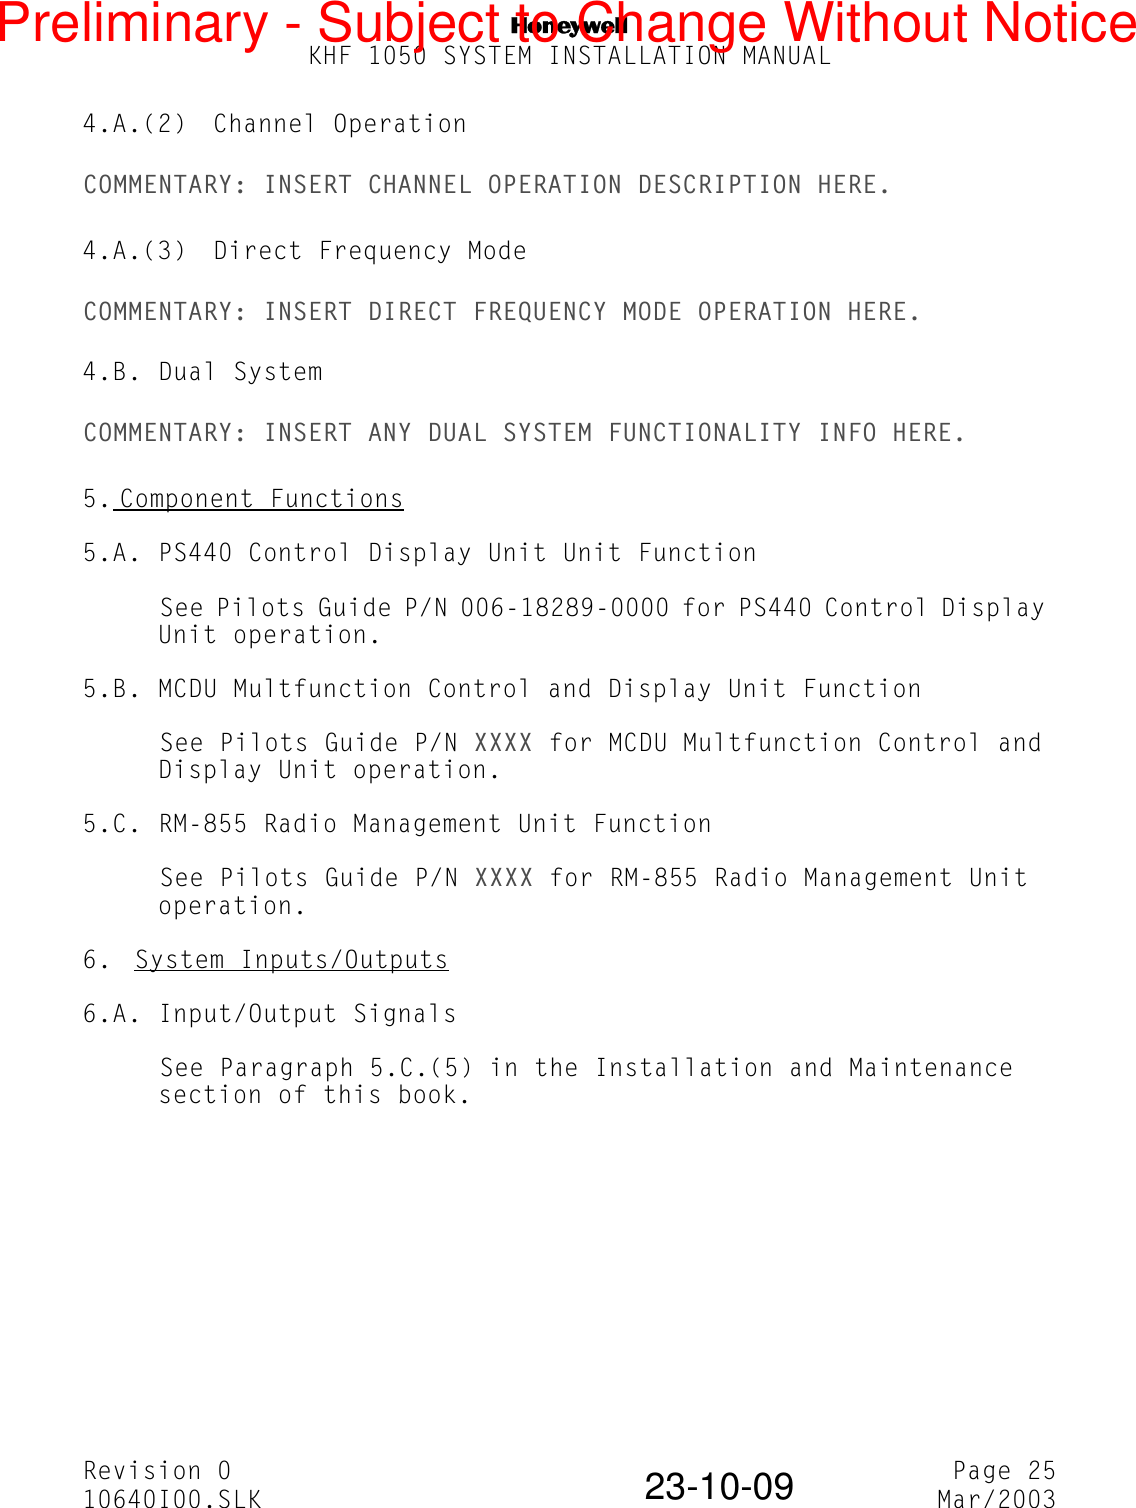 NKHF 1050 SYSTEM INSTALLATION MANUALRevision 0 Page 2510640I00.SLK Mar/200323-10-094.A.(2) Channel OperationCOMMENTARY: INSERT CHANNEL OPERATION DESCRIPTION HERE.4.A.(3) Direct Frequency ModeCOMMENTARY: INSERT DIRECT FREQUENCY MODE OPERATION HERE.4.B. Dual SystemCOMMENTARY: INSERT ANY DUAL SYSTEM FUNCTIONALITY INFO HERE.5. Component Functions5.A. PS440 Control Display Unit Unit FunctionSee Pilots Guide P/N 006-18289-0000 for PS440 Control Display Unit operation.5.B. MCDU Multfunction Control and Display Unit FunctionSee Pilots Guide P/N XXXX for MCDU Multfunction Control and Display Unit operation.5.C. RM-855 Radio Management Unit FunctionSee Pilots Guide P/N XXXX for RM-855 Radio Management Unit operation.6.  System Inputs/Outputs6.A. Input/Output SignalsSee Paragraph 5.C.(5) in the Installation and Maintenance section of this book.Preliminary - Subject to Change Without Notice